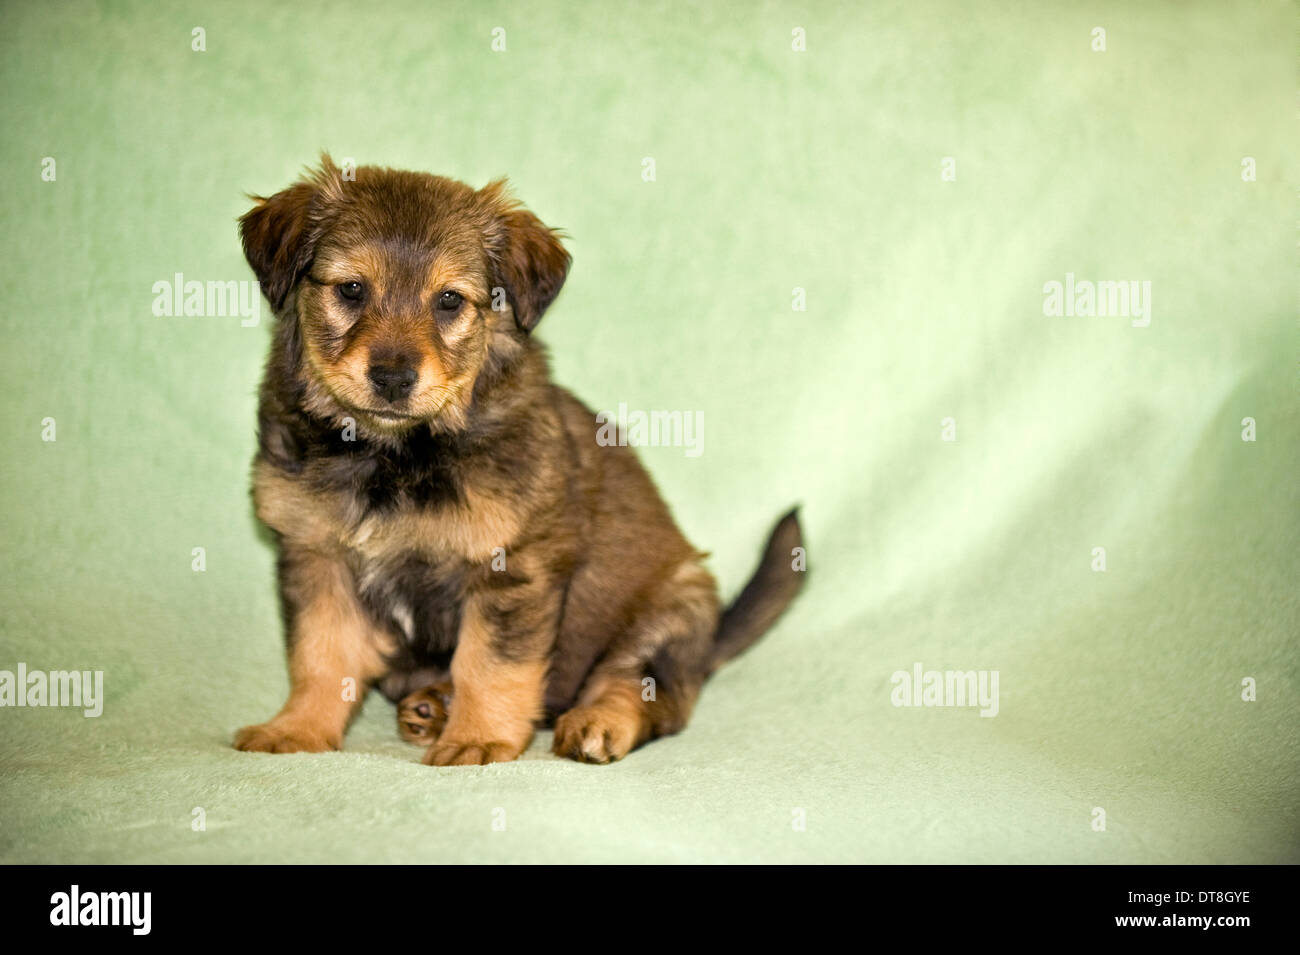 Mixed-breed dog Puppy  sitting on a green blanket Stock Photo